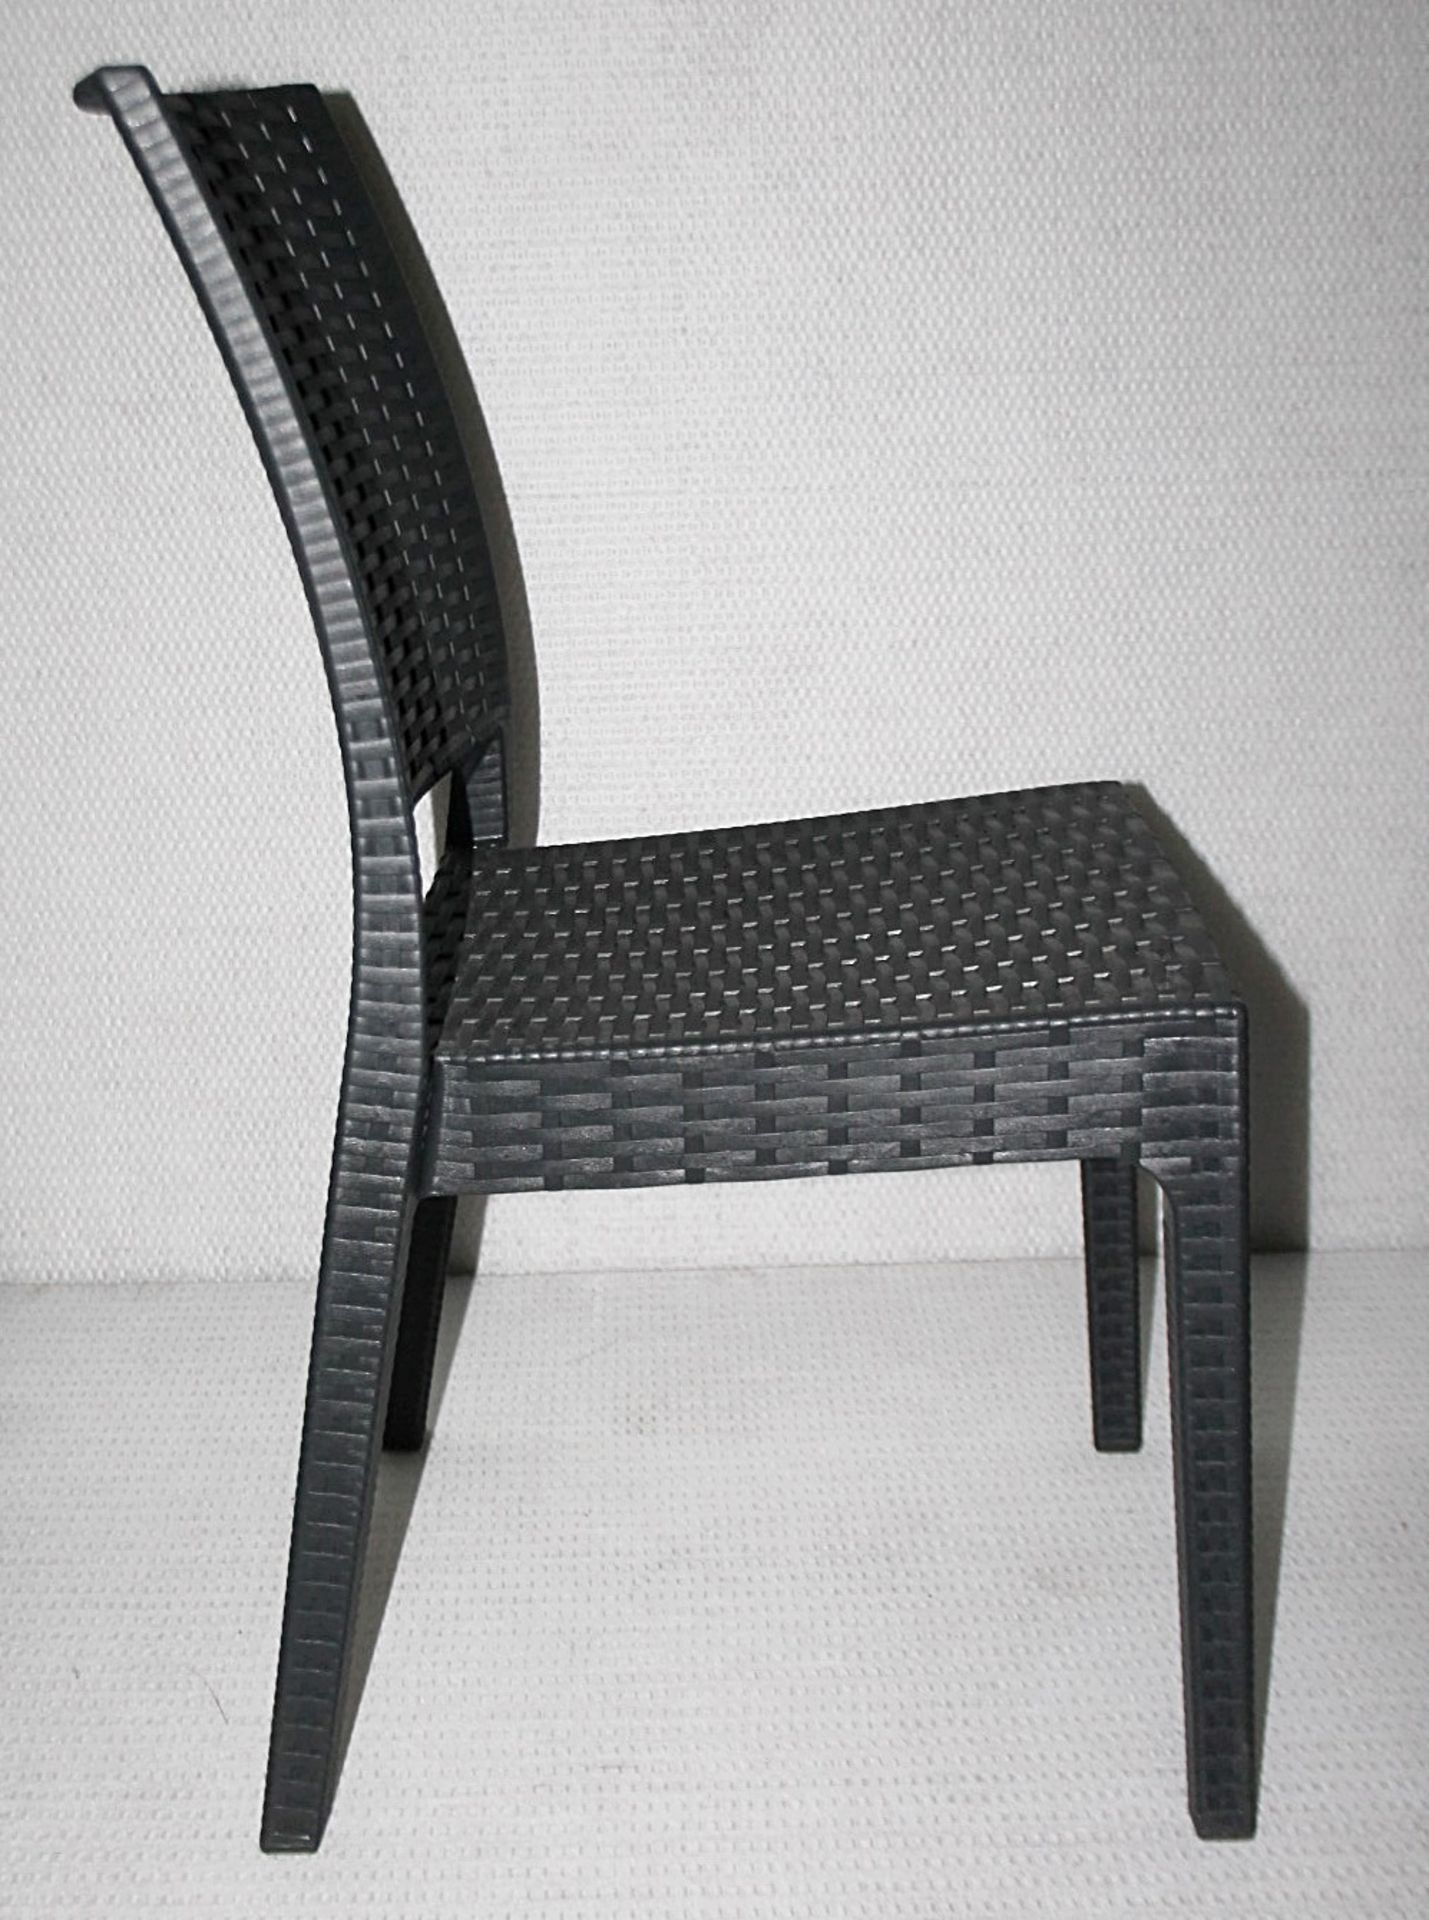 8 x Siesta 'Florida' Rattan Style Garden Chairs In Dark Grey - Suitable For Commercial or Home Use - - Image 13 of 14